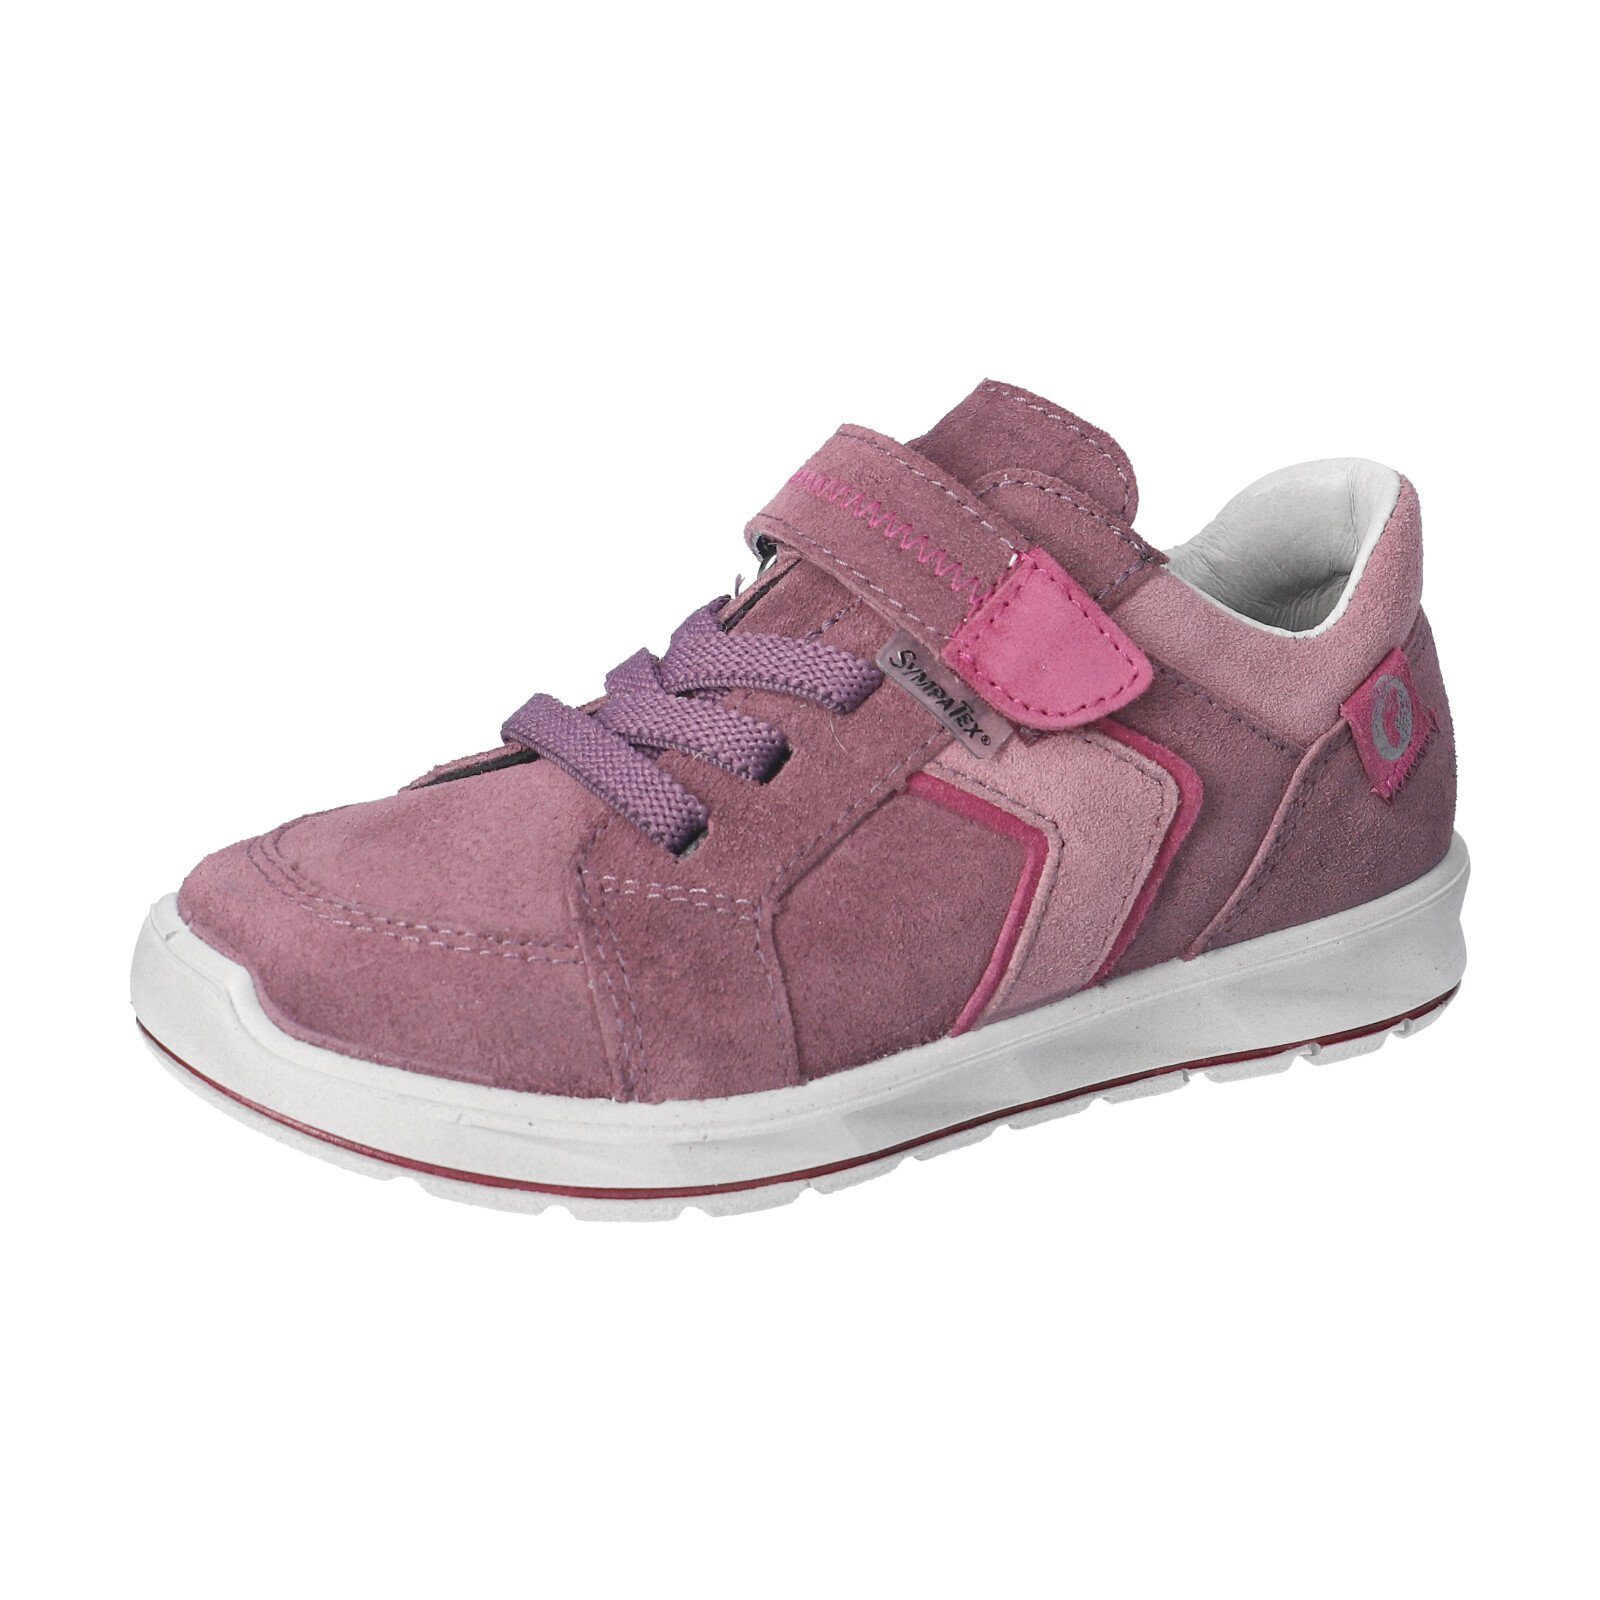 (370) pflaume/sucre Ricosta Sneaker